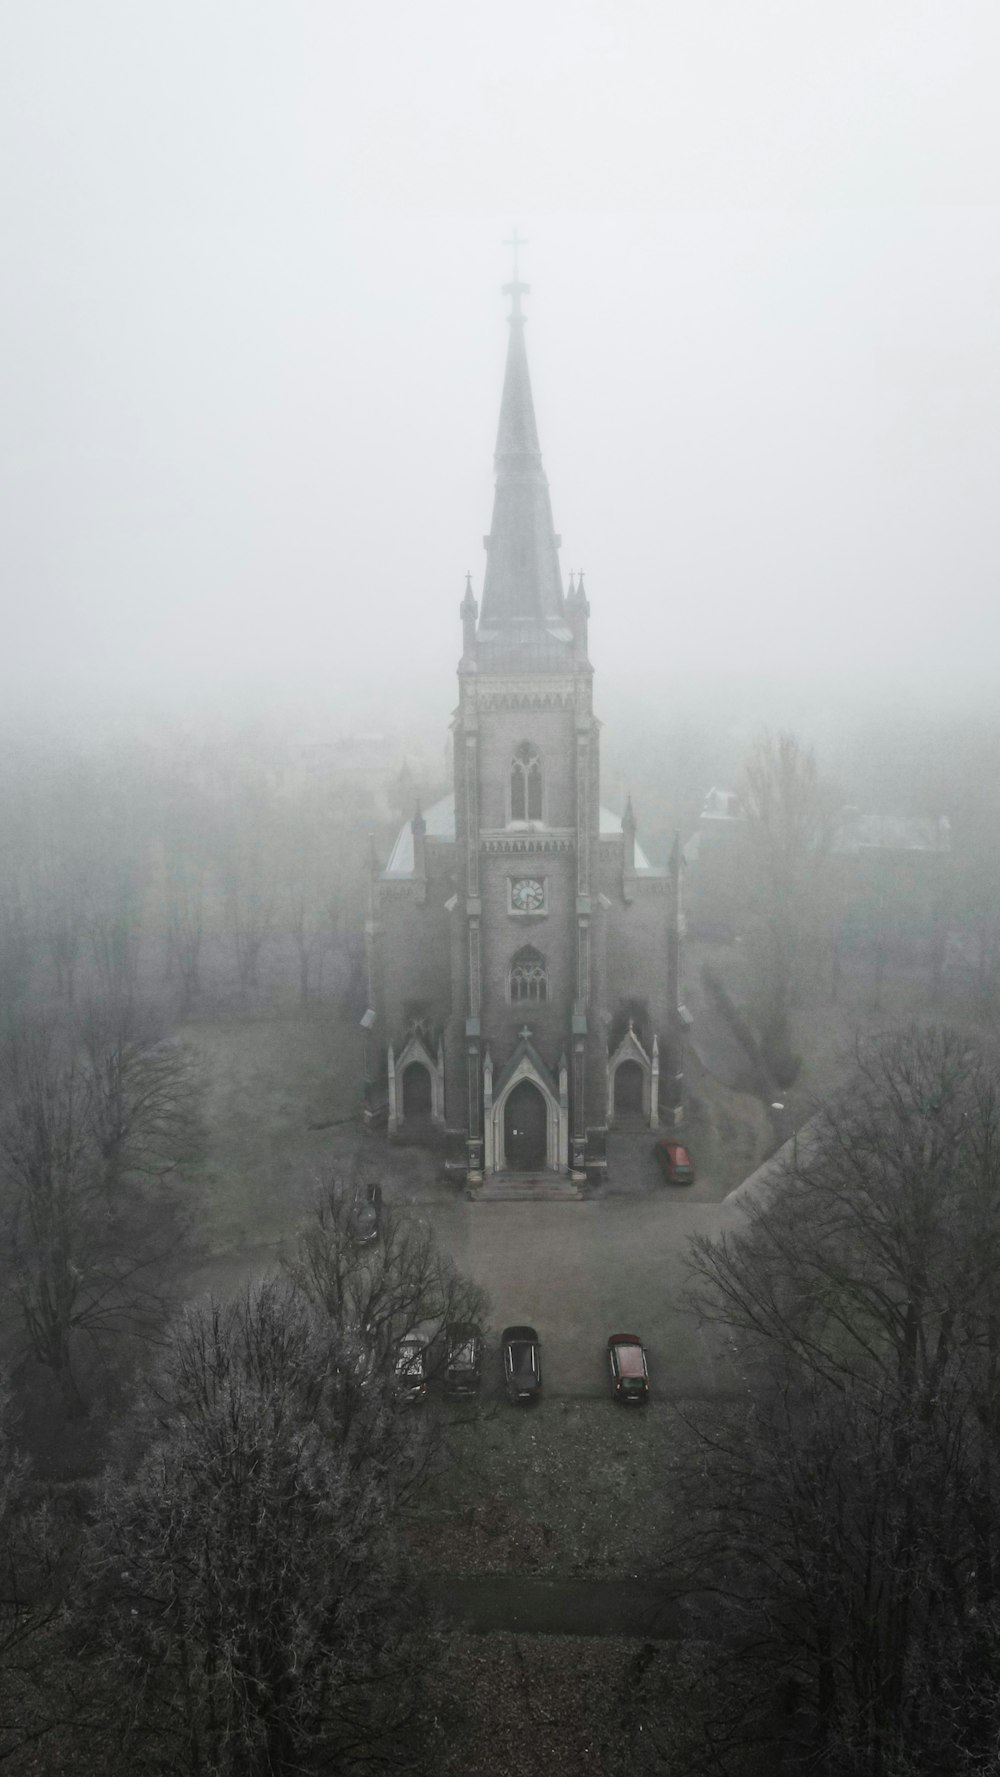 an old church in the middle of a foggy day